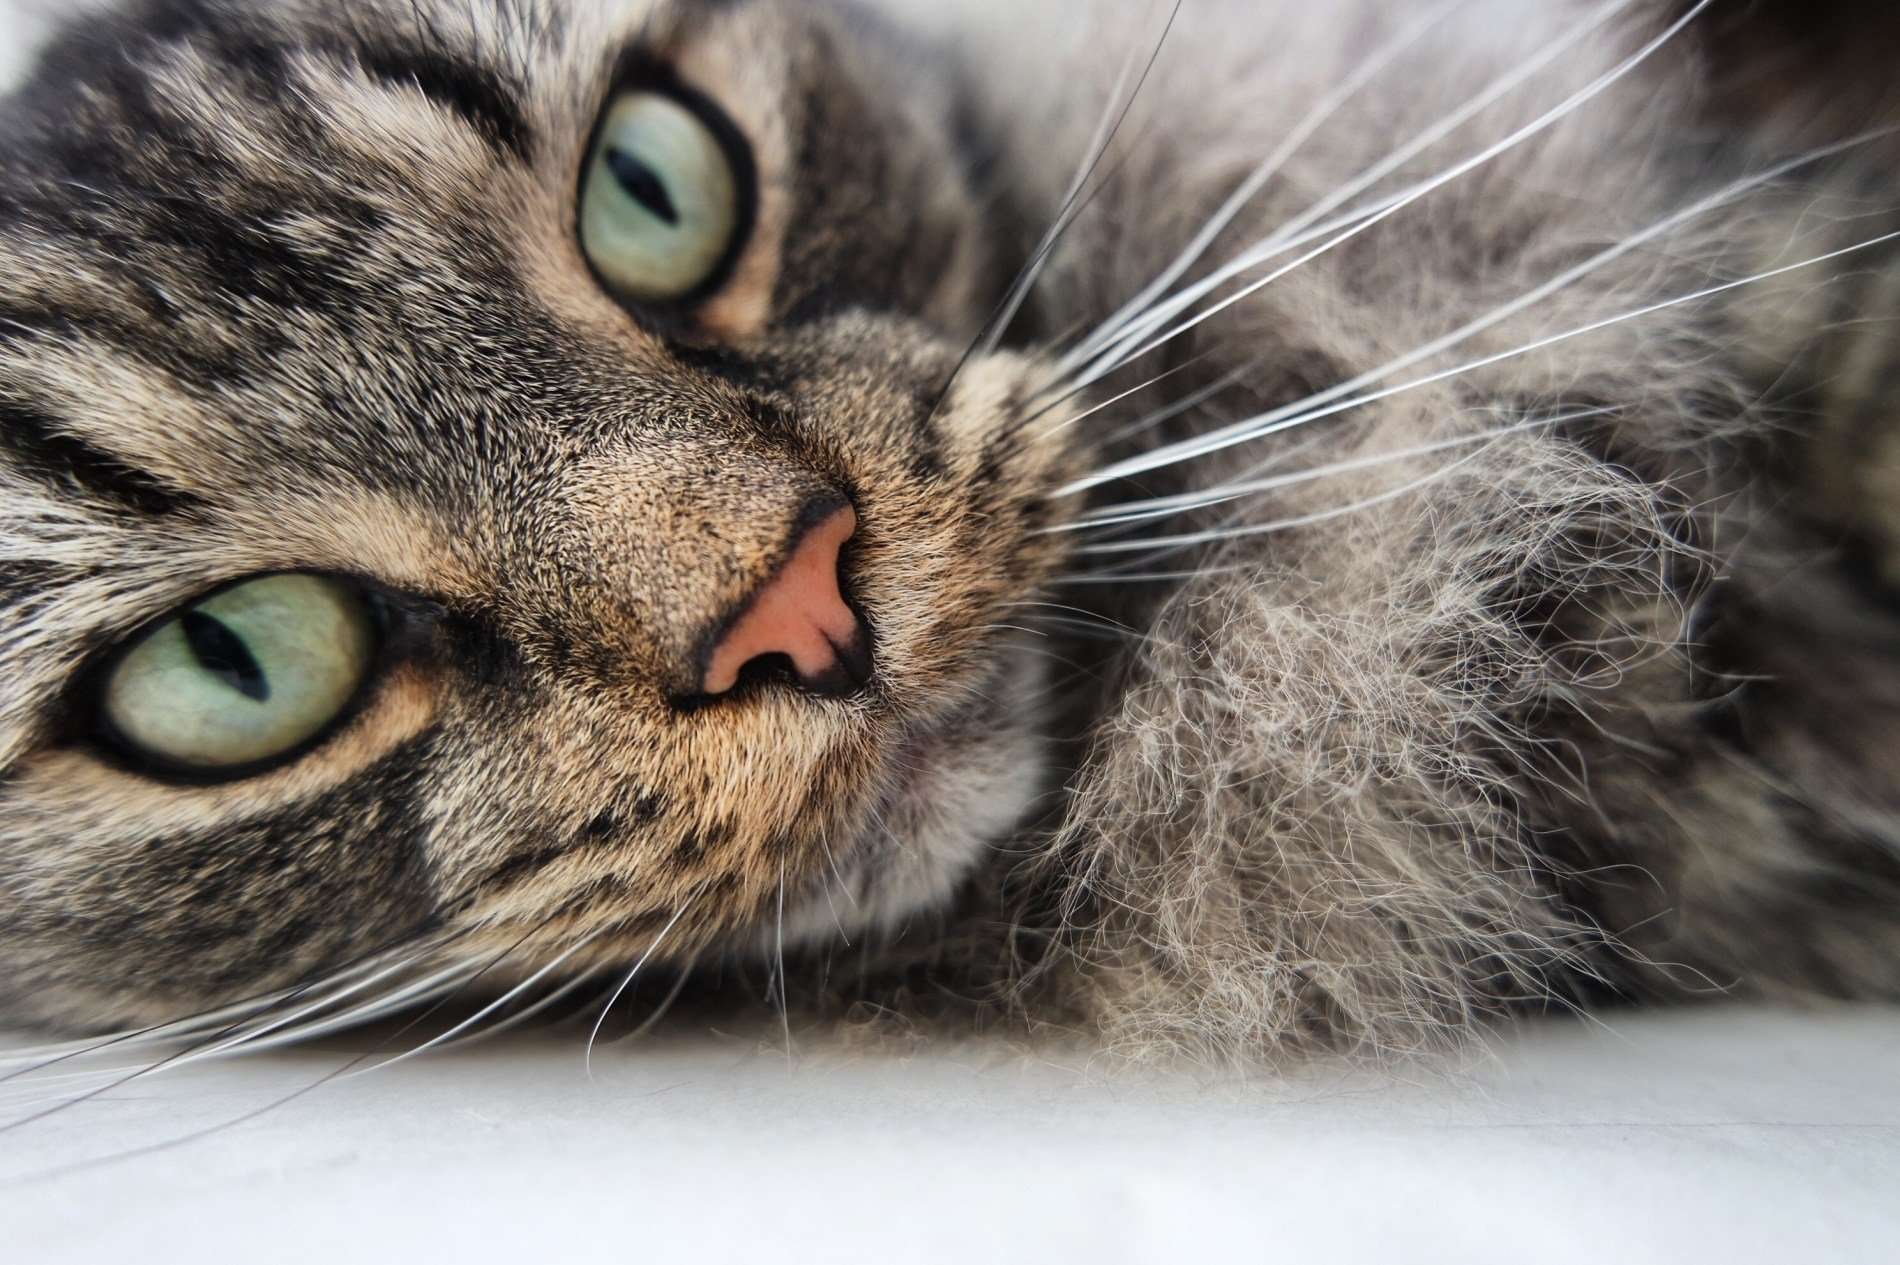 Why does your cat purr? #Whiskas #AllAboutCats